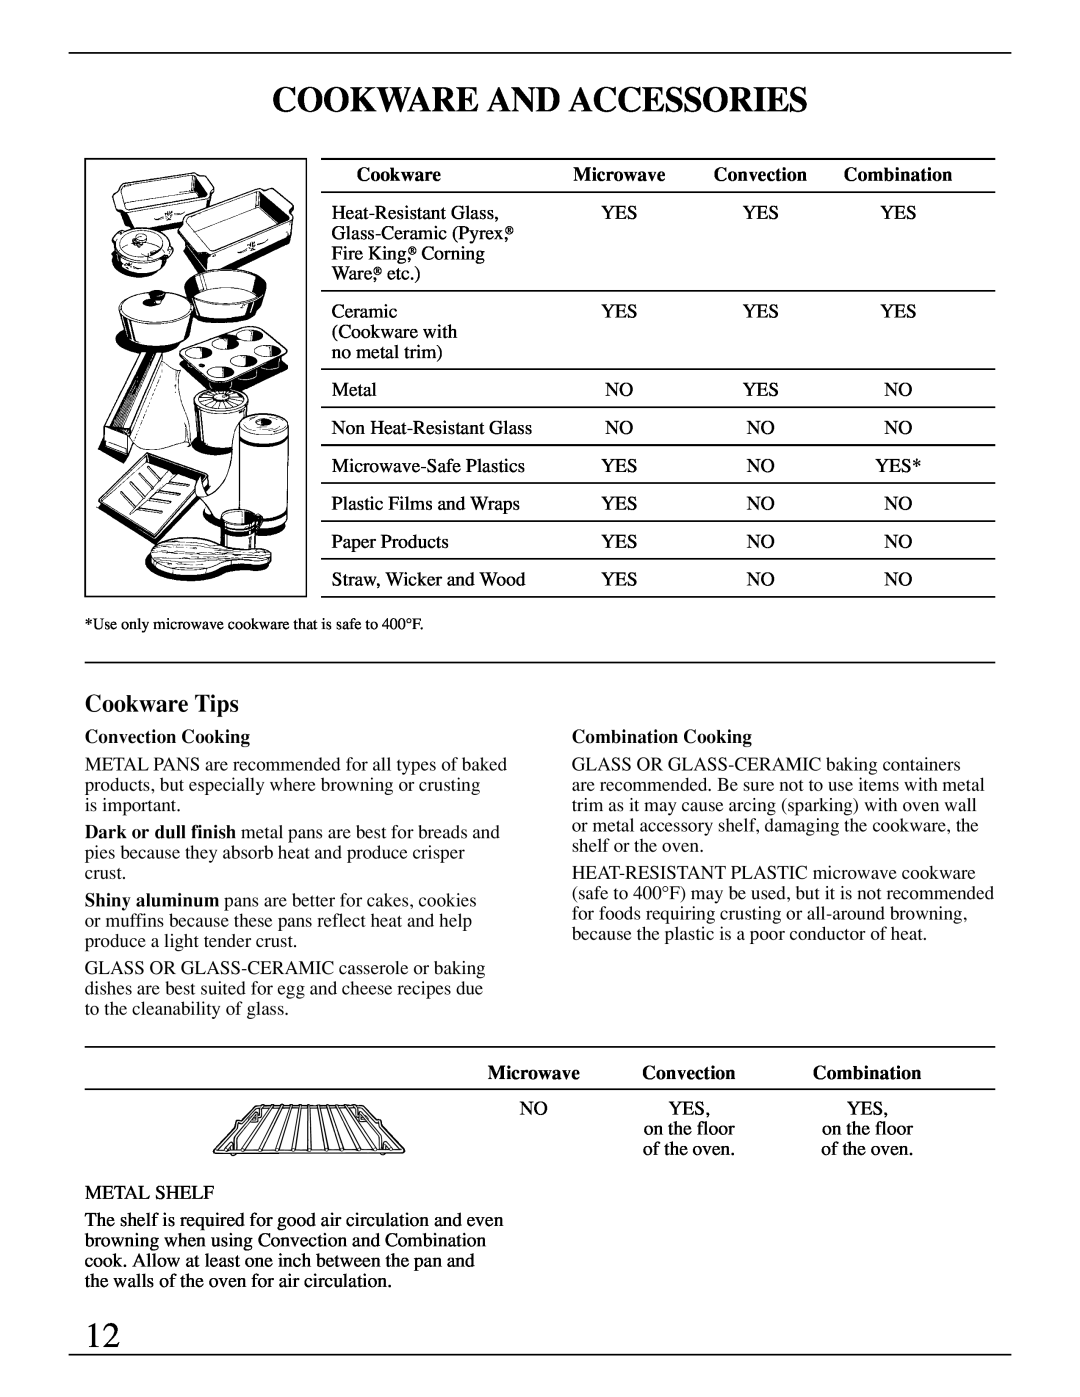 GE Monogram ZMC1095 owner manual Cookware And Accessories, Cookware Tips 